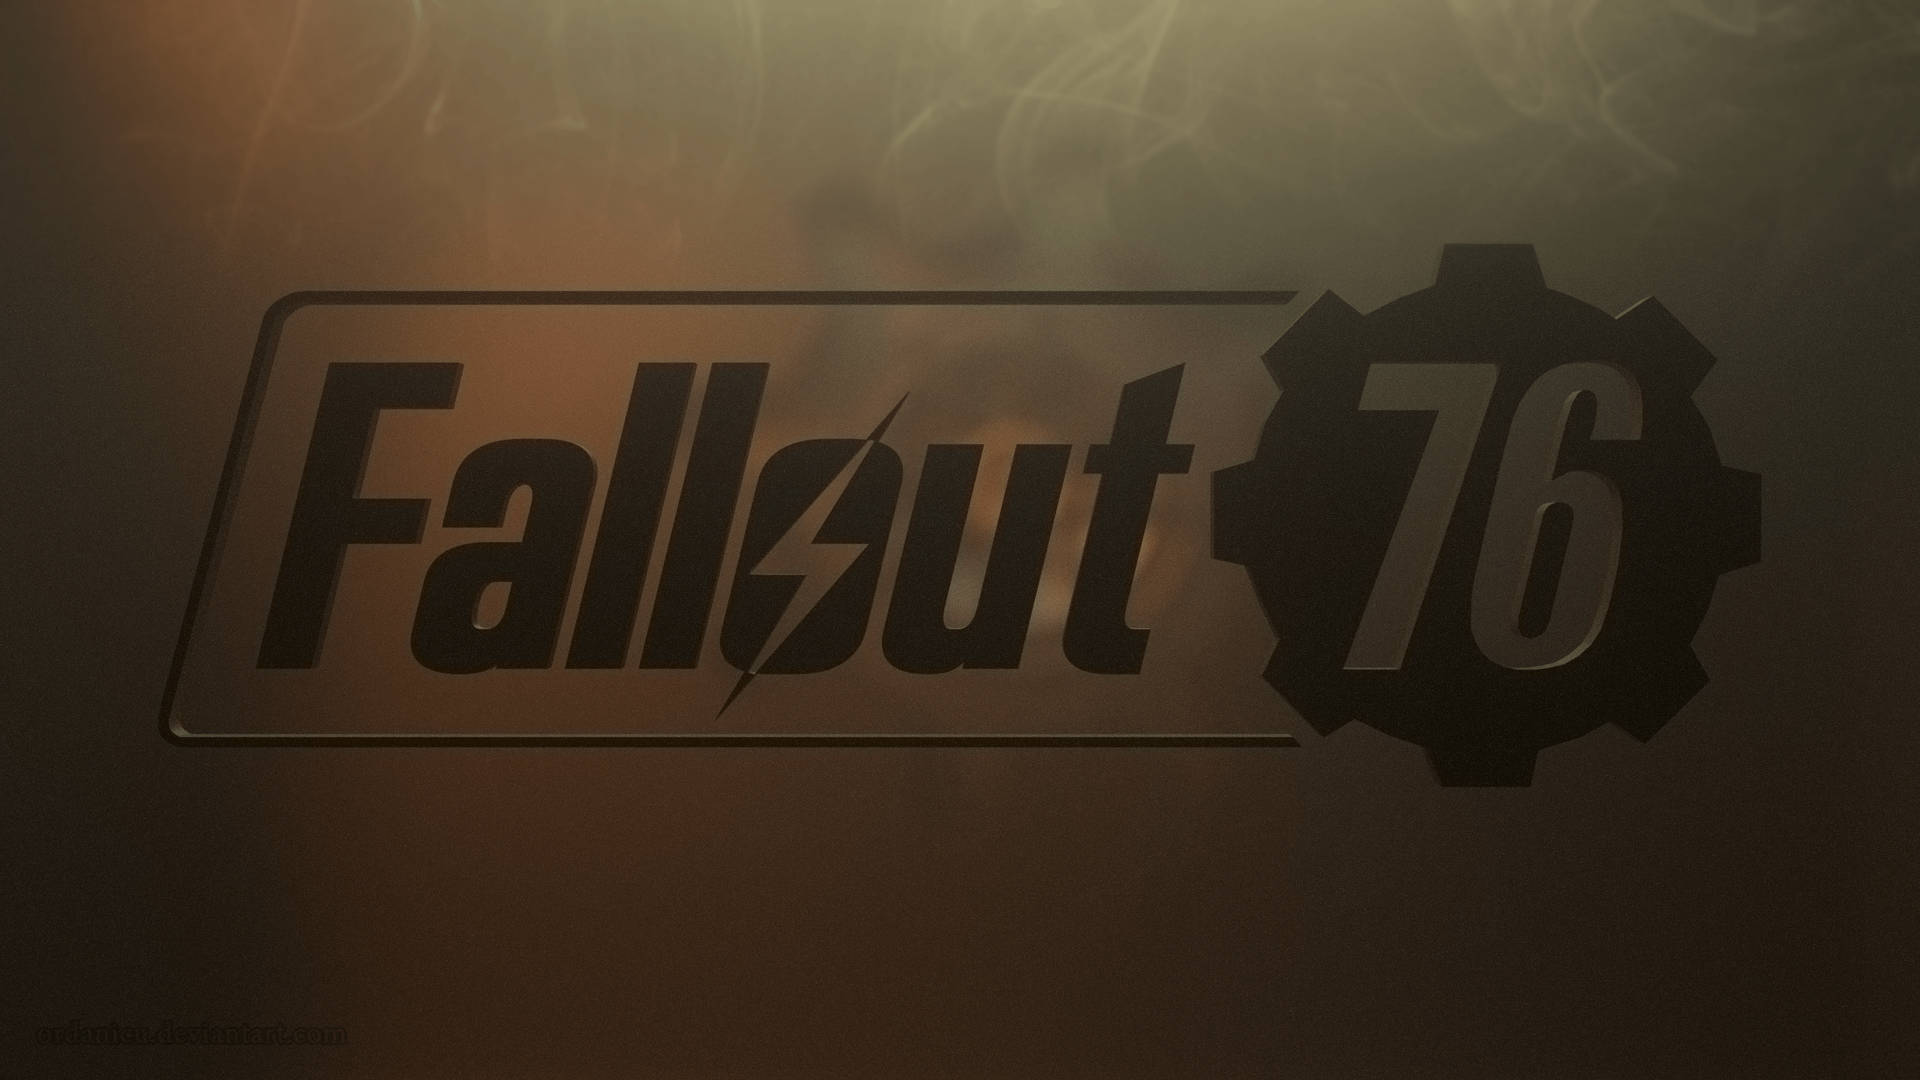 2560X1440 Fallout 76 Wallpaper and Background